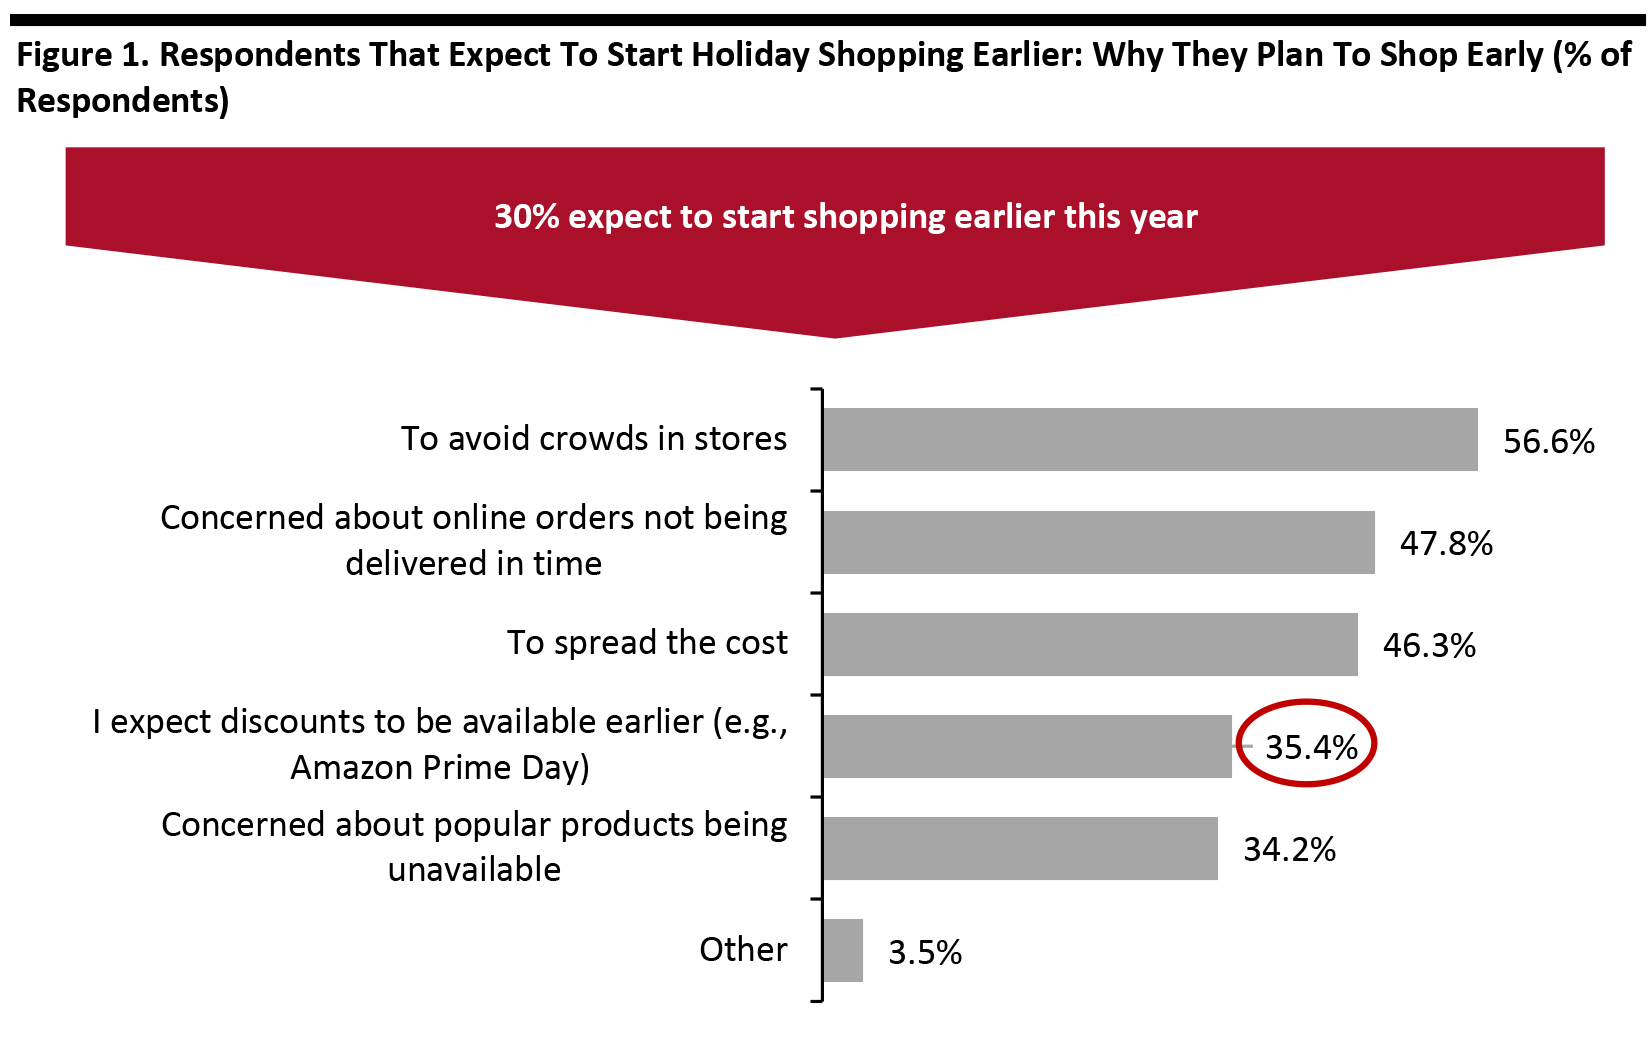 Figure 1. Respondents That Expect To Start Holiday Shopping Earlier: Why They Plan To Shop Early (% of Respondents)